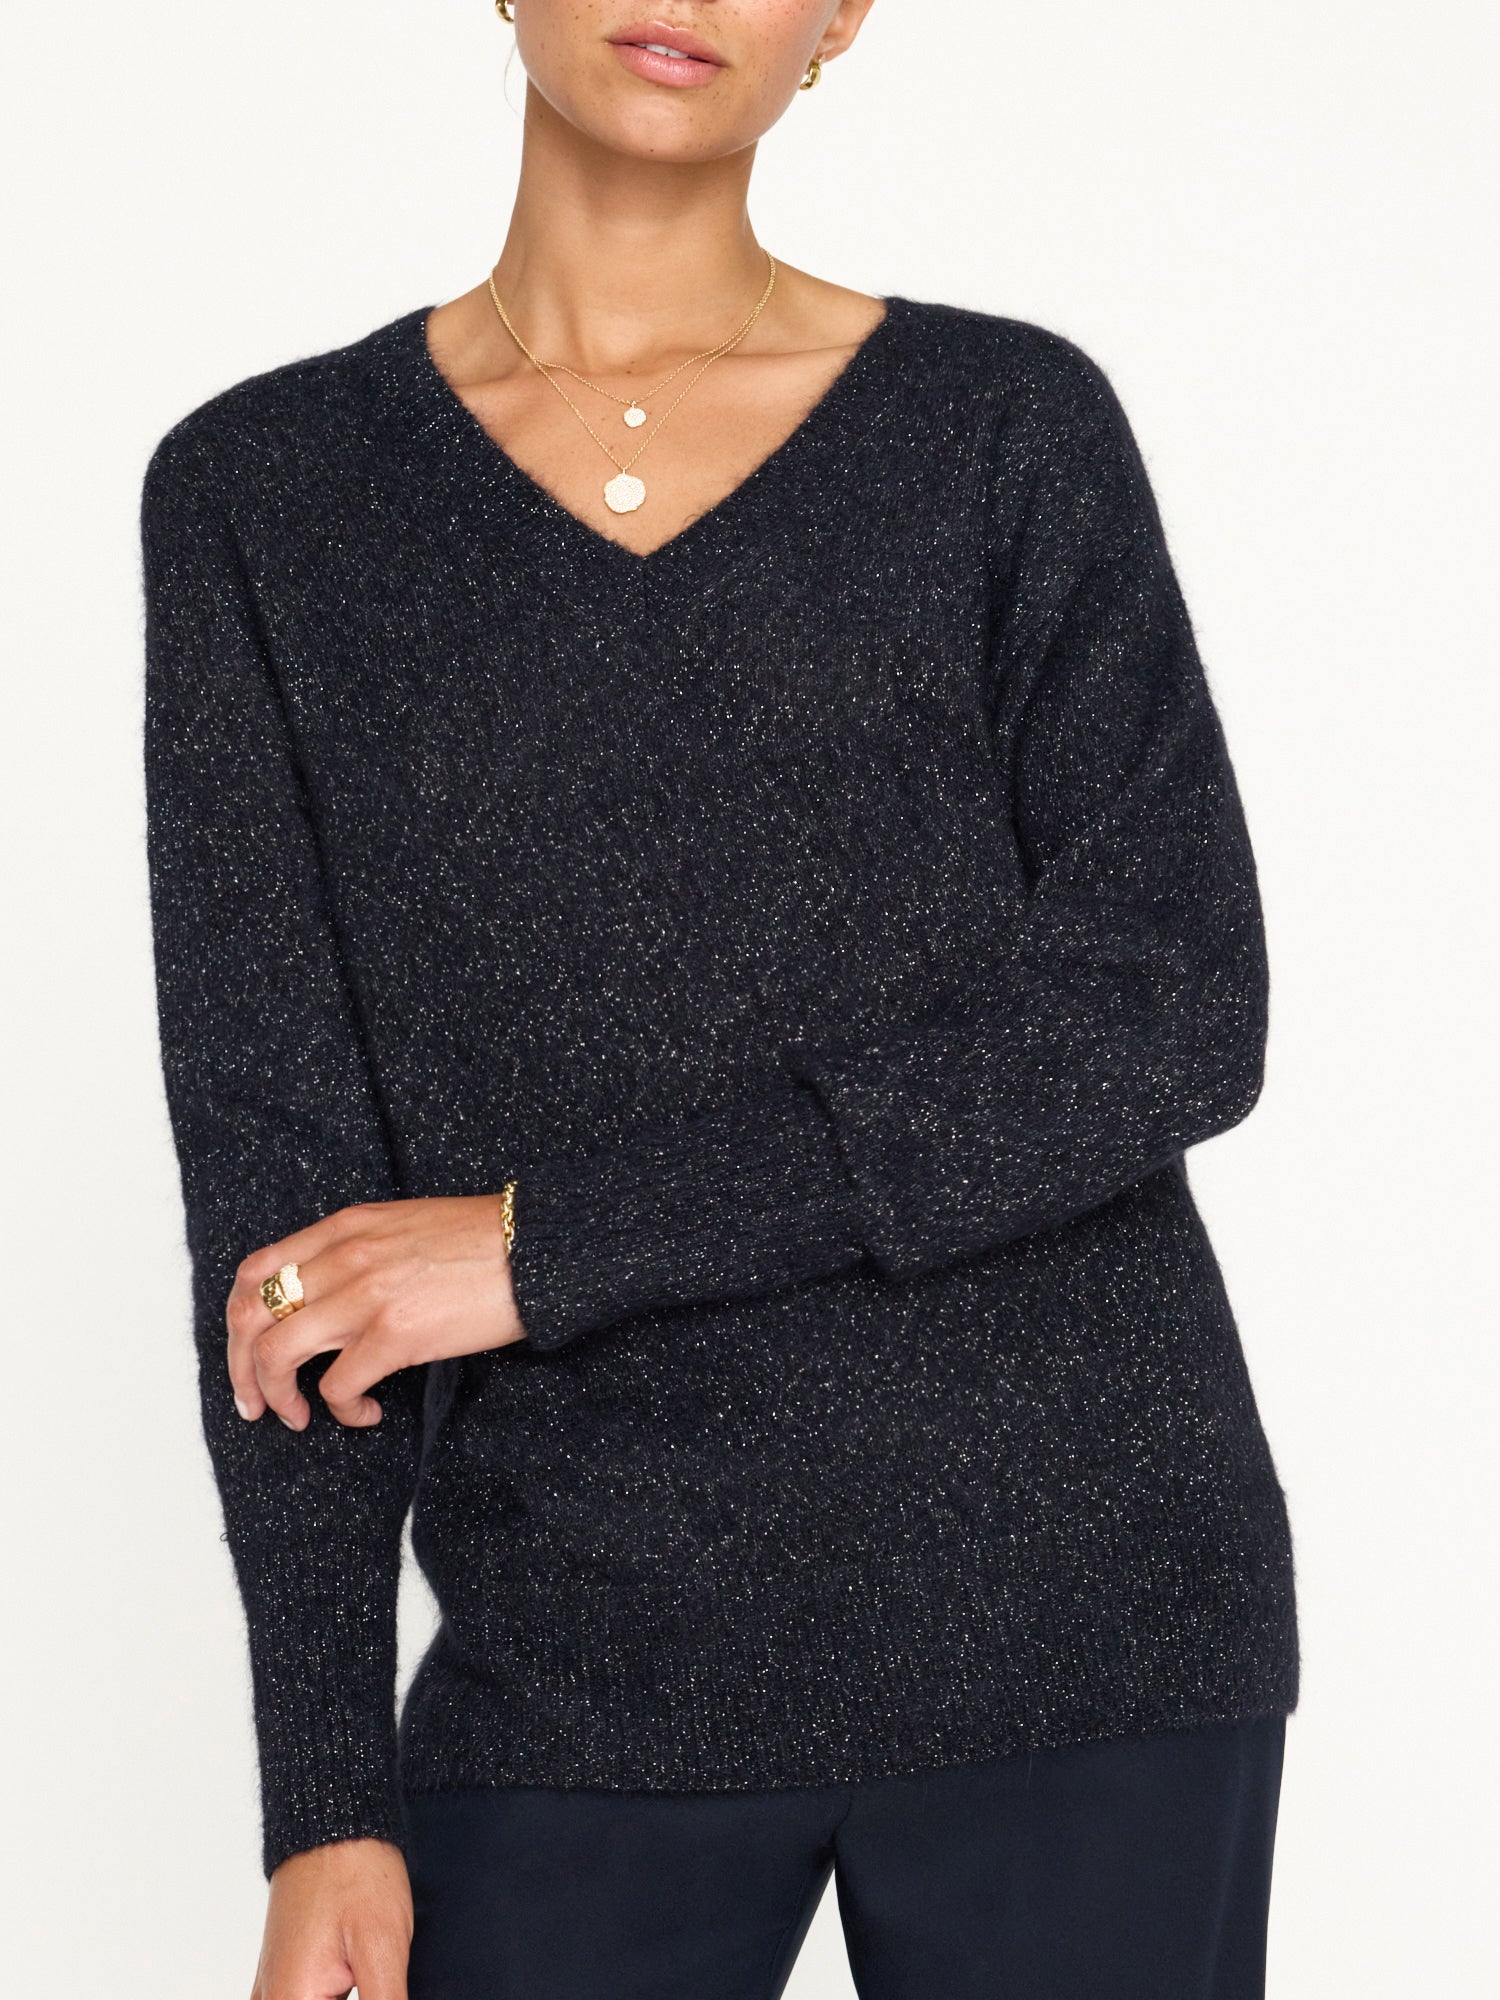 Allery v neck metallic navy sweater front view 4